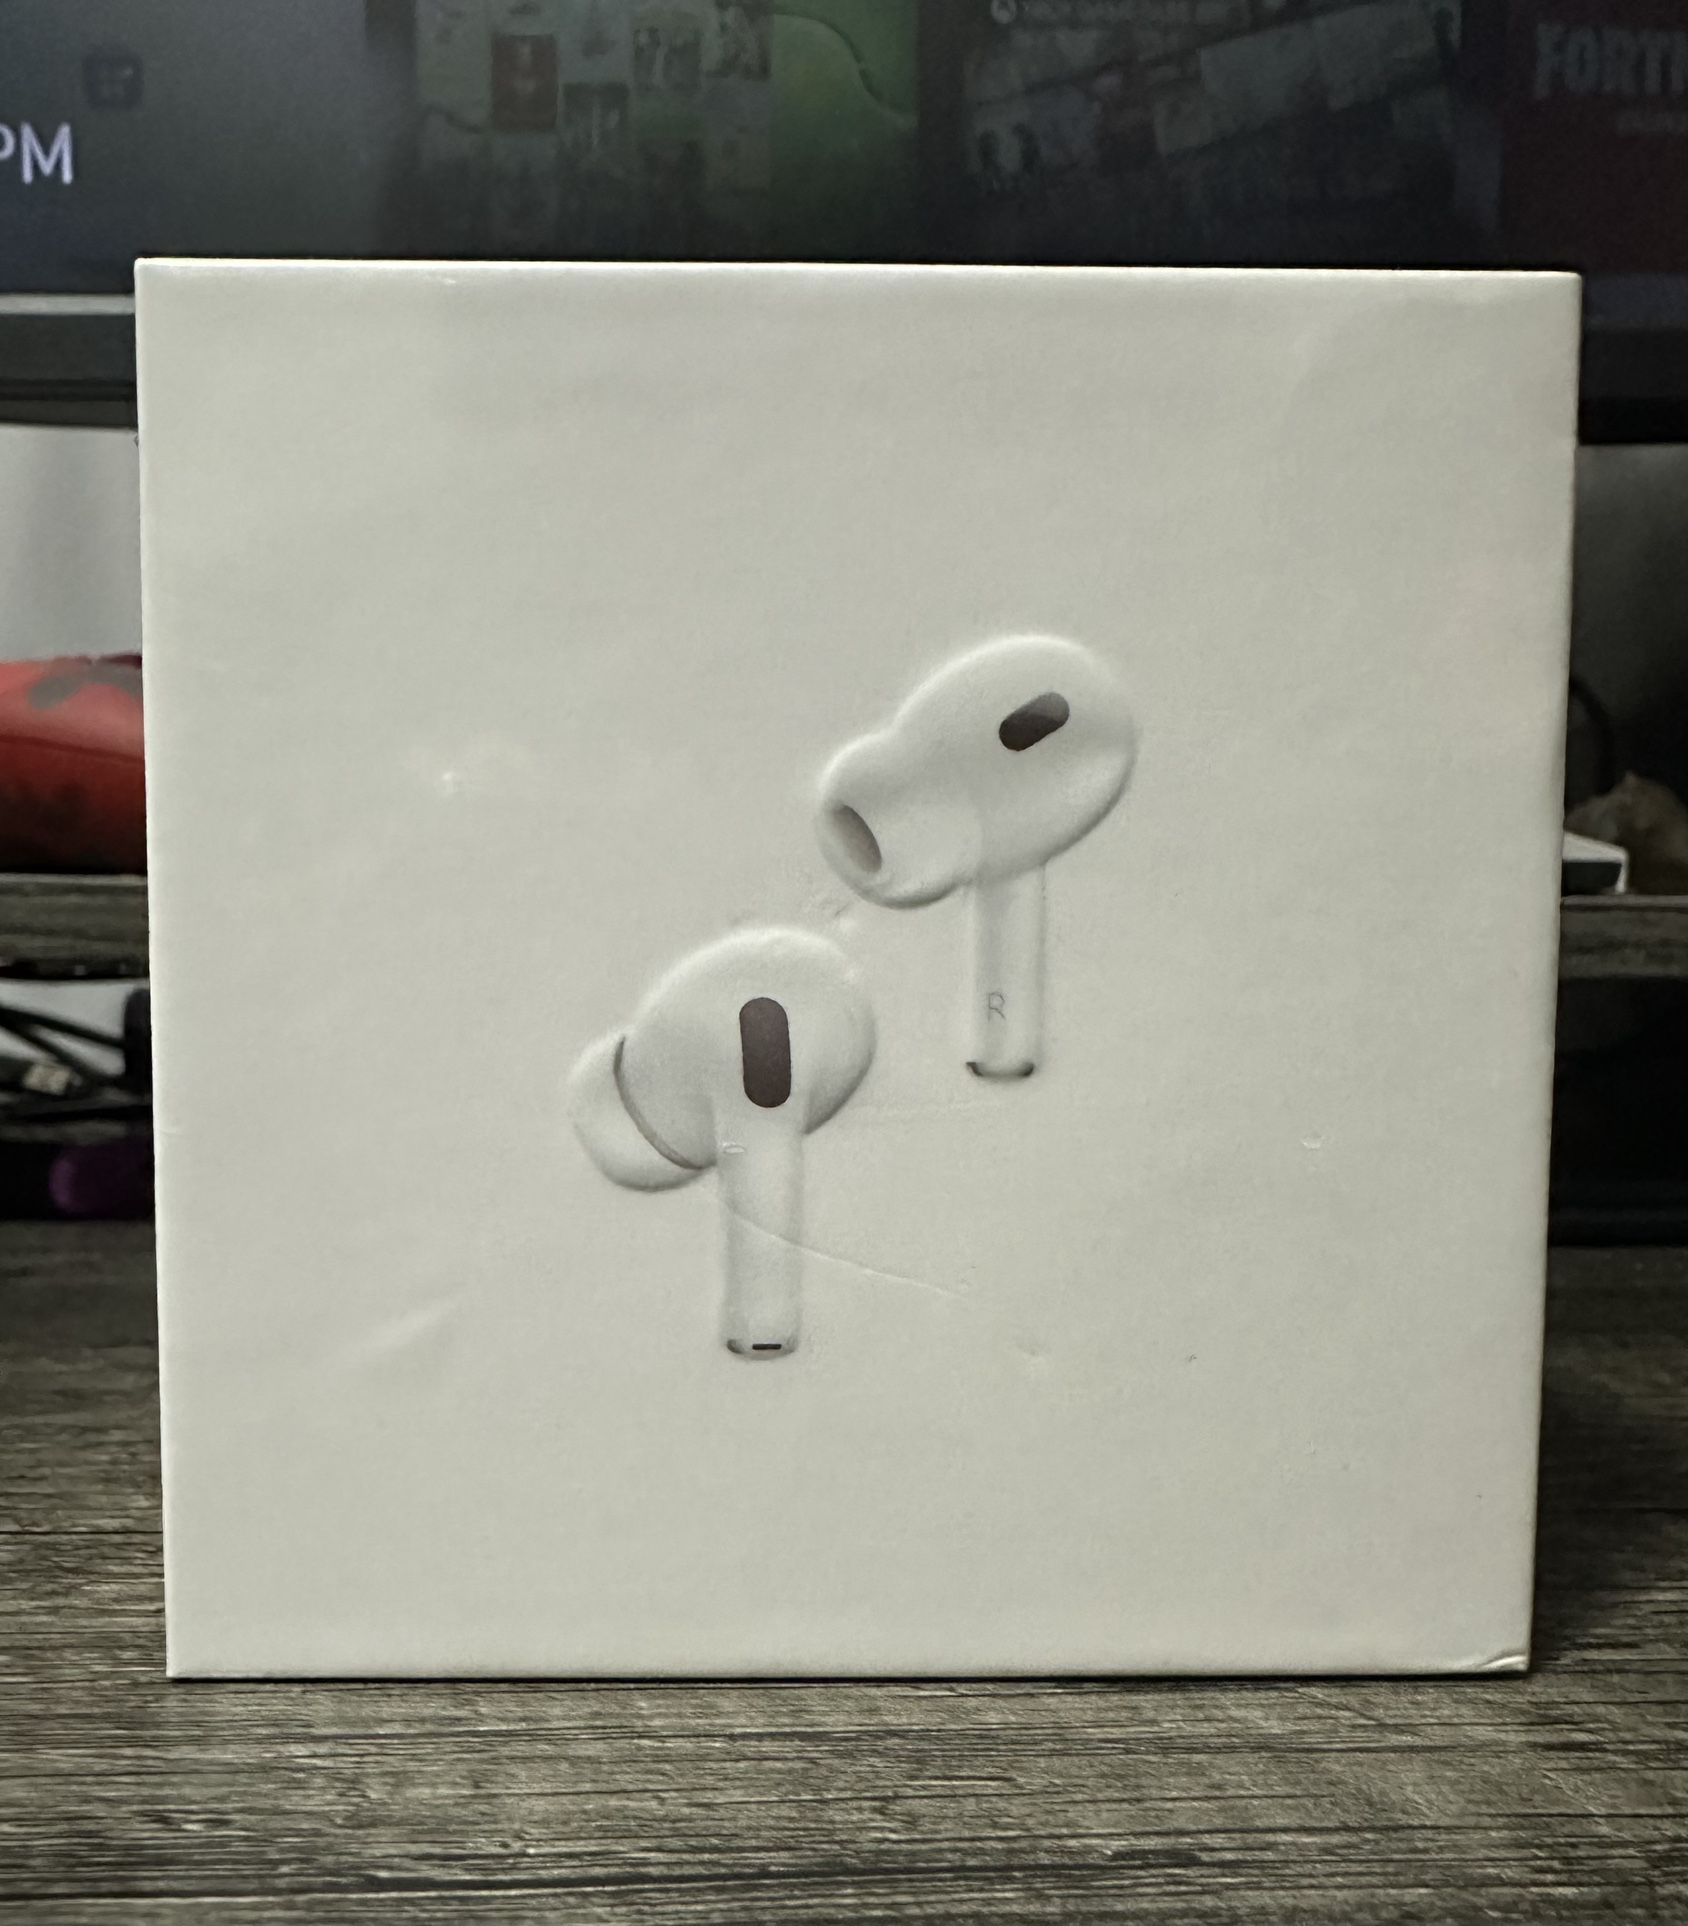 Airpods Pro 2nd Gen - NEW IN BOX